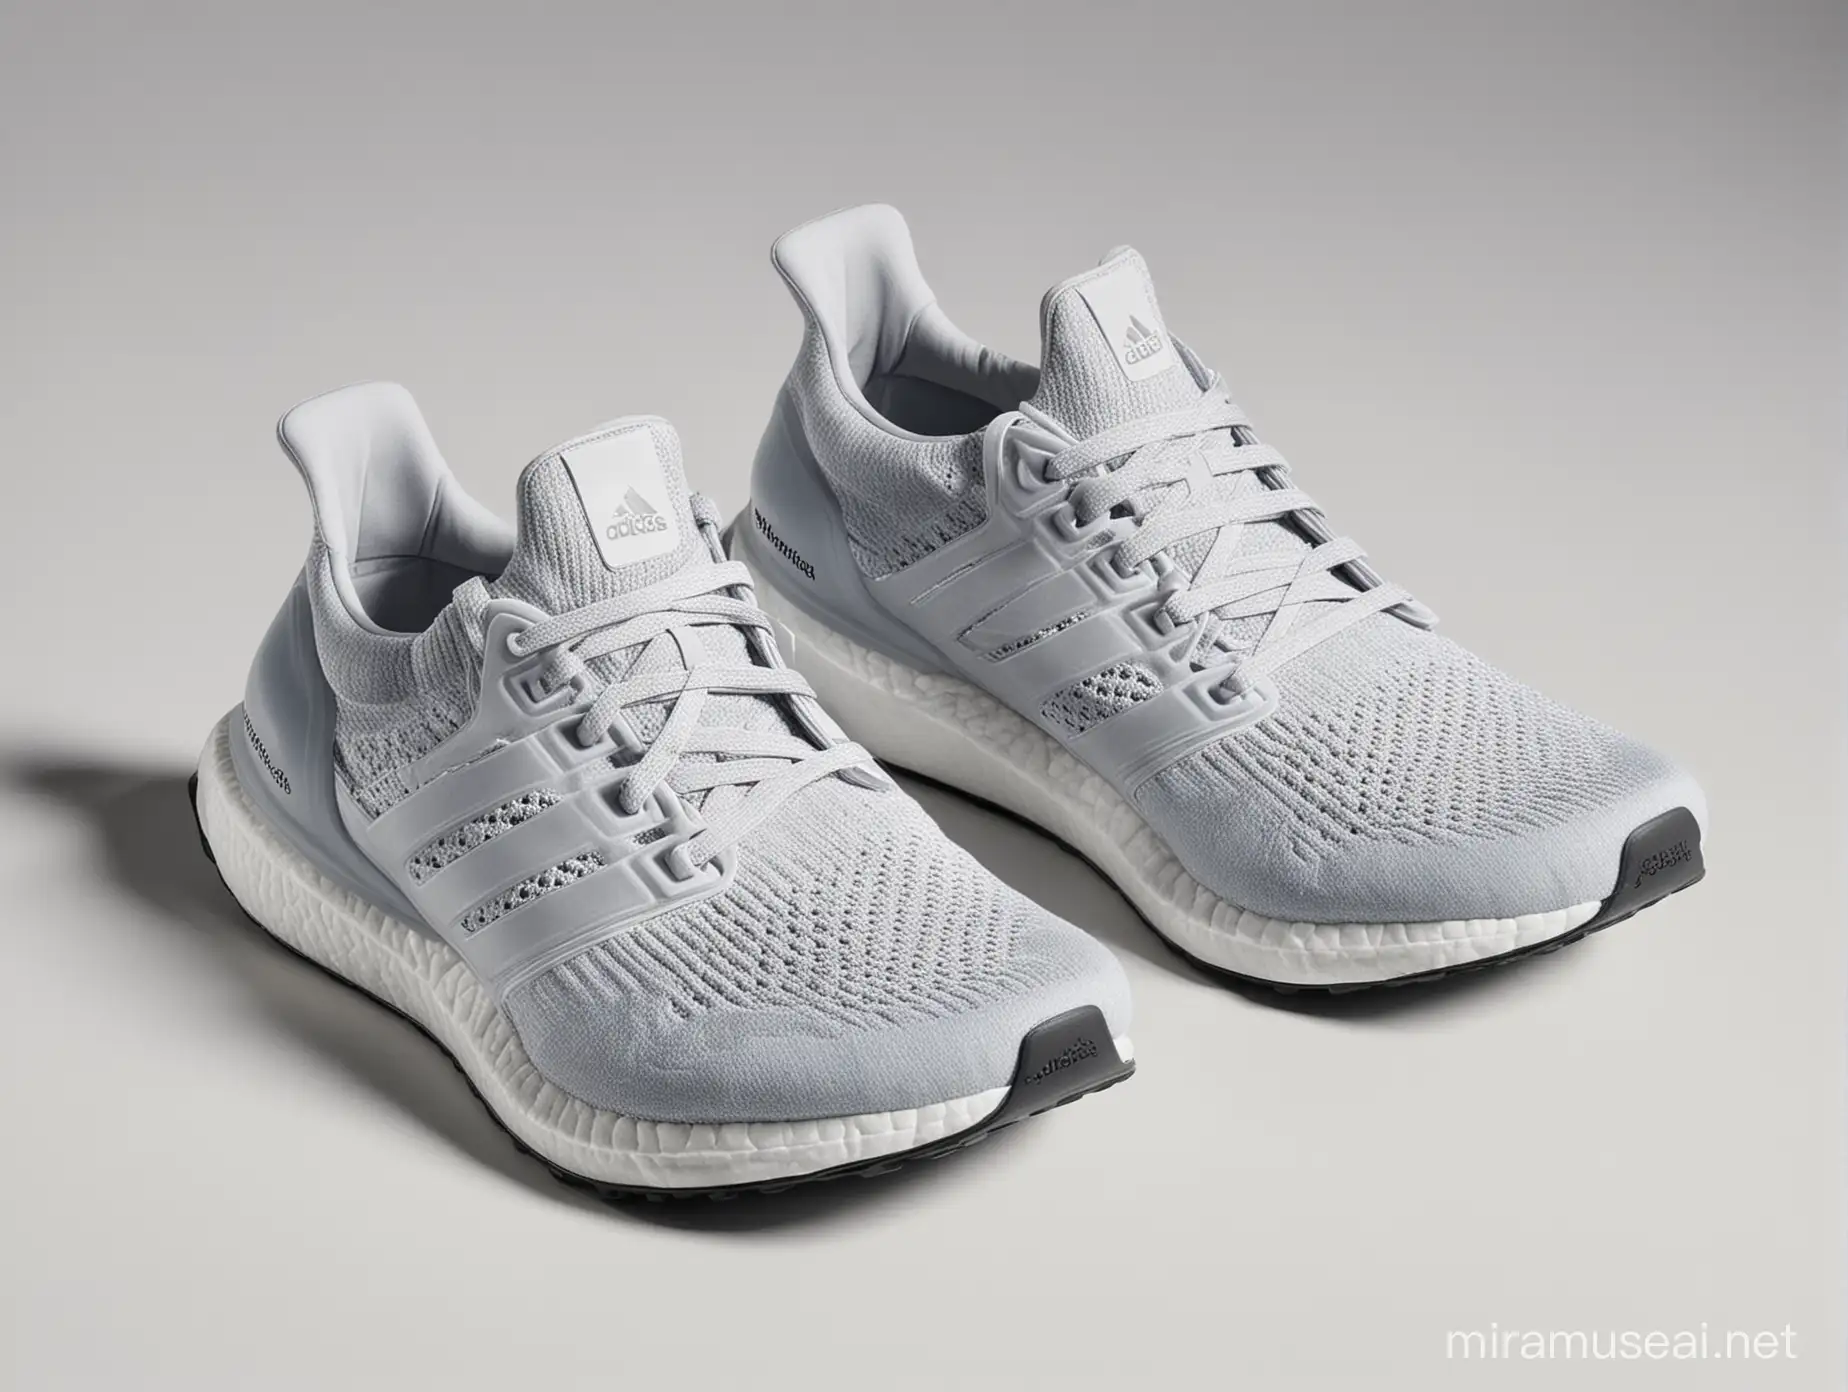 Adidas Ultraboost Light Running Shoes on Grey Background